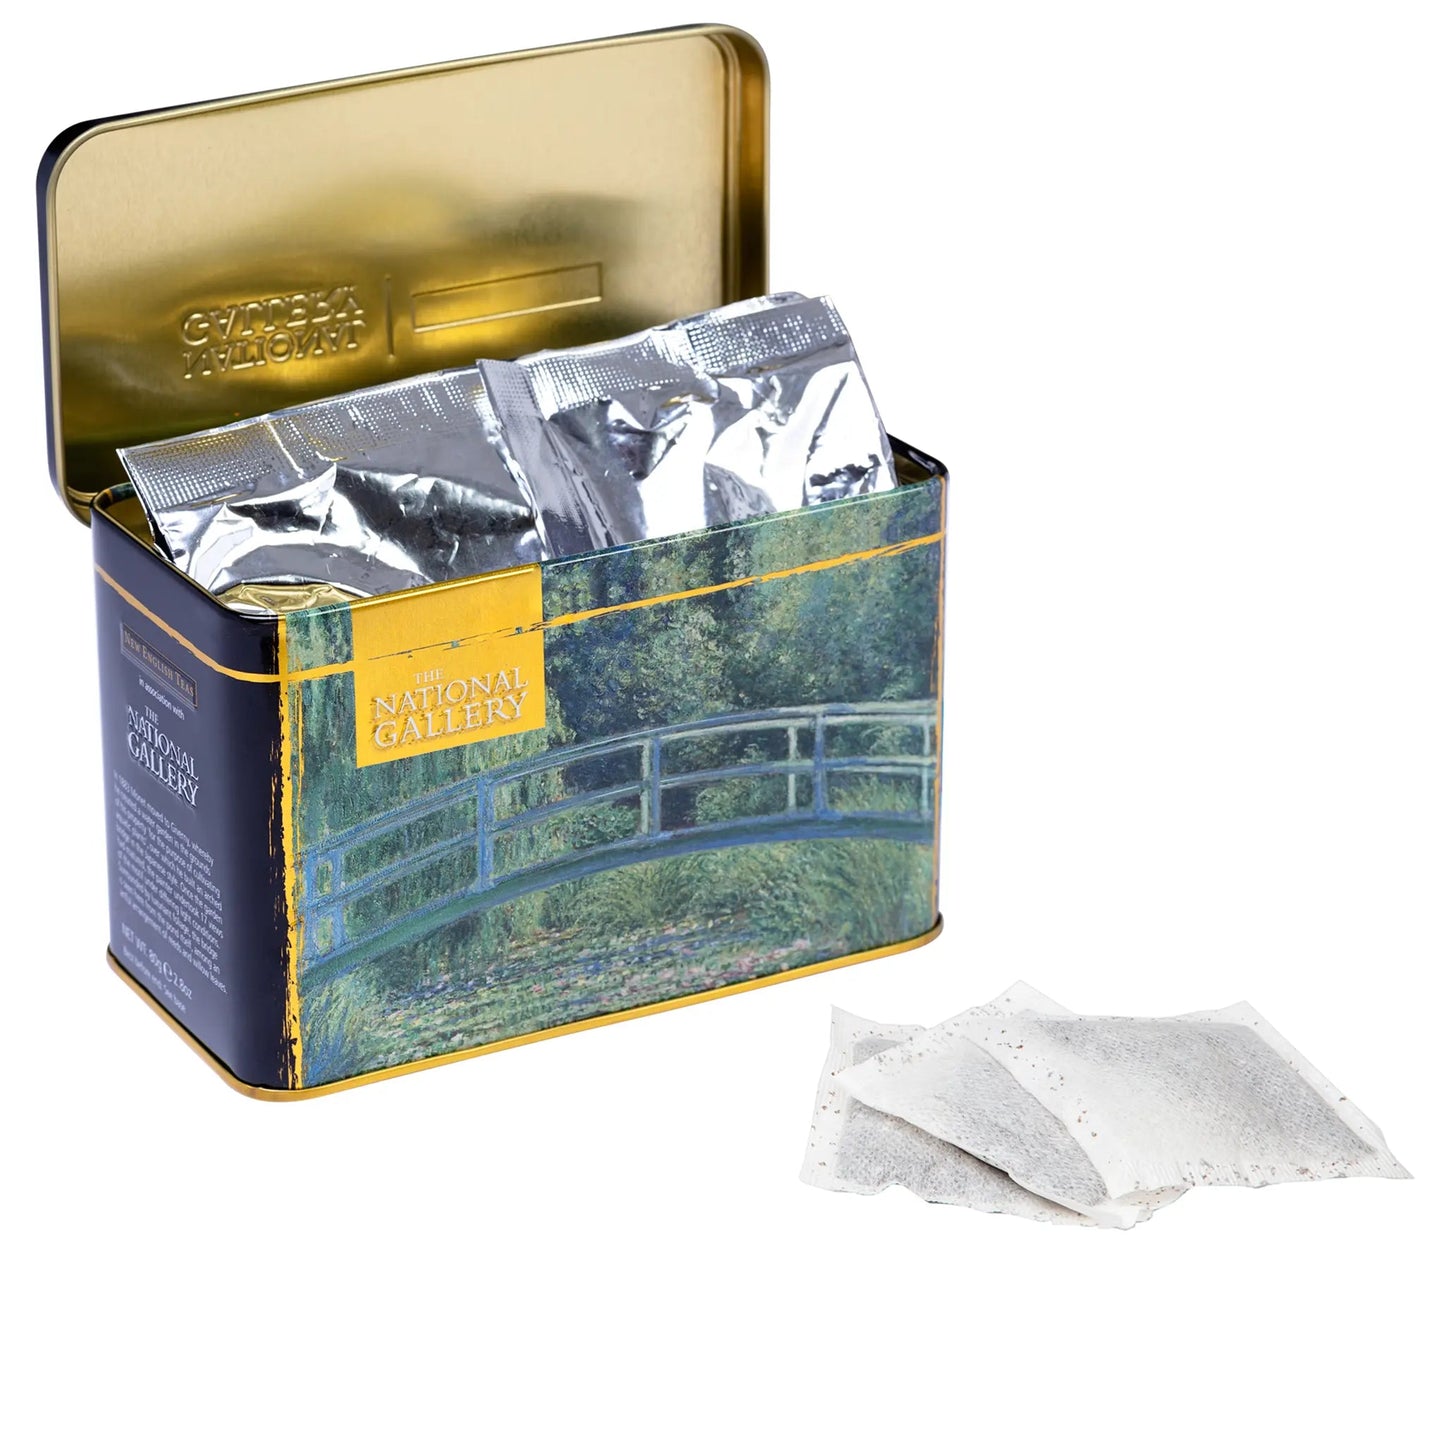 The National Gallery Tea Tin Collection Gift Pack Gift Packs New English Teas 